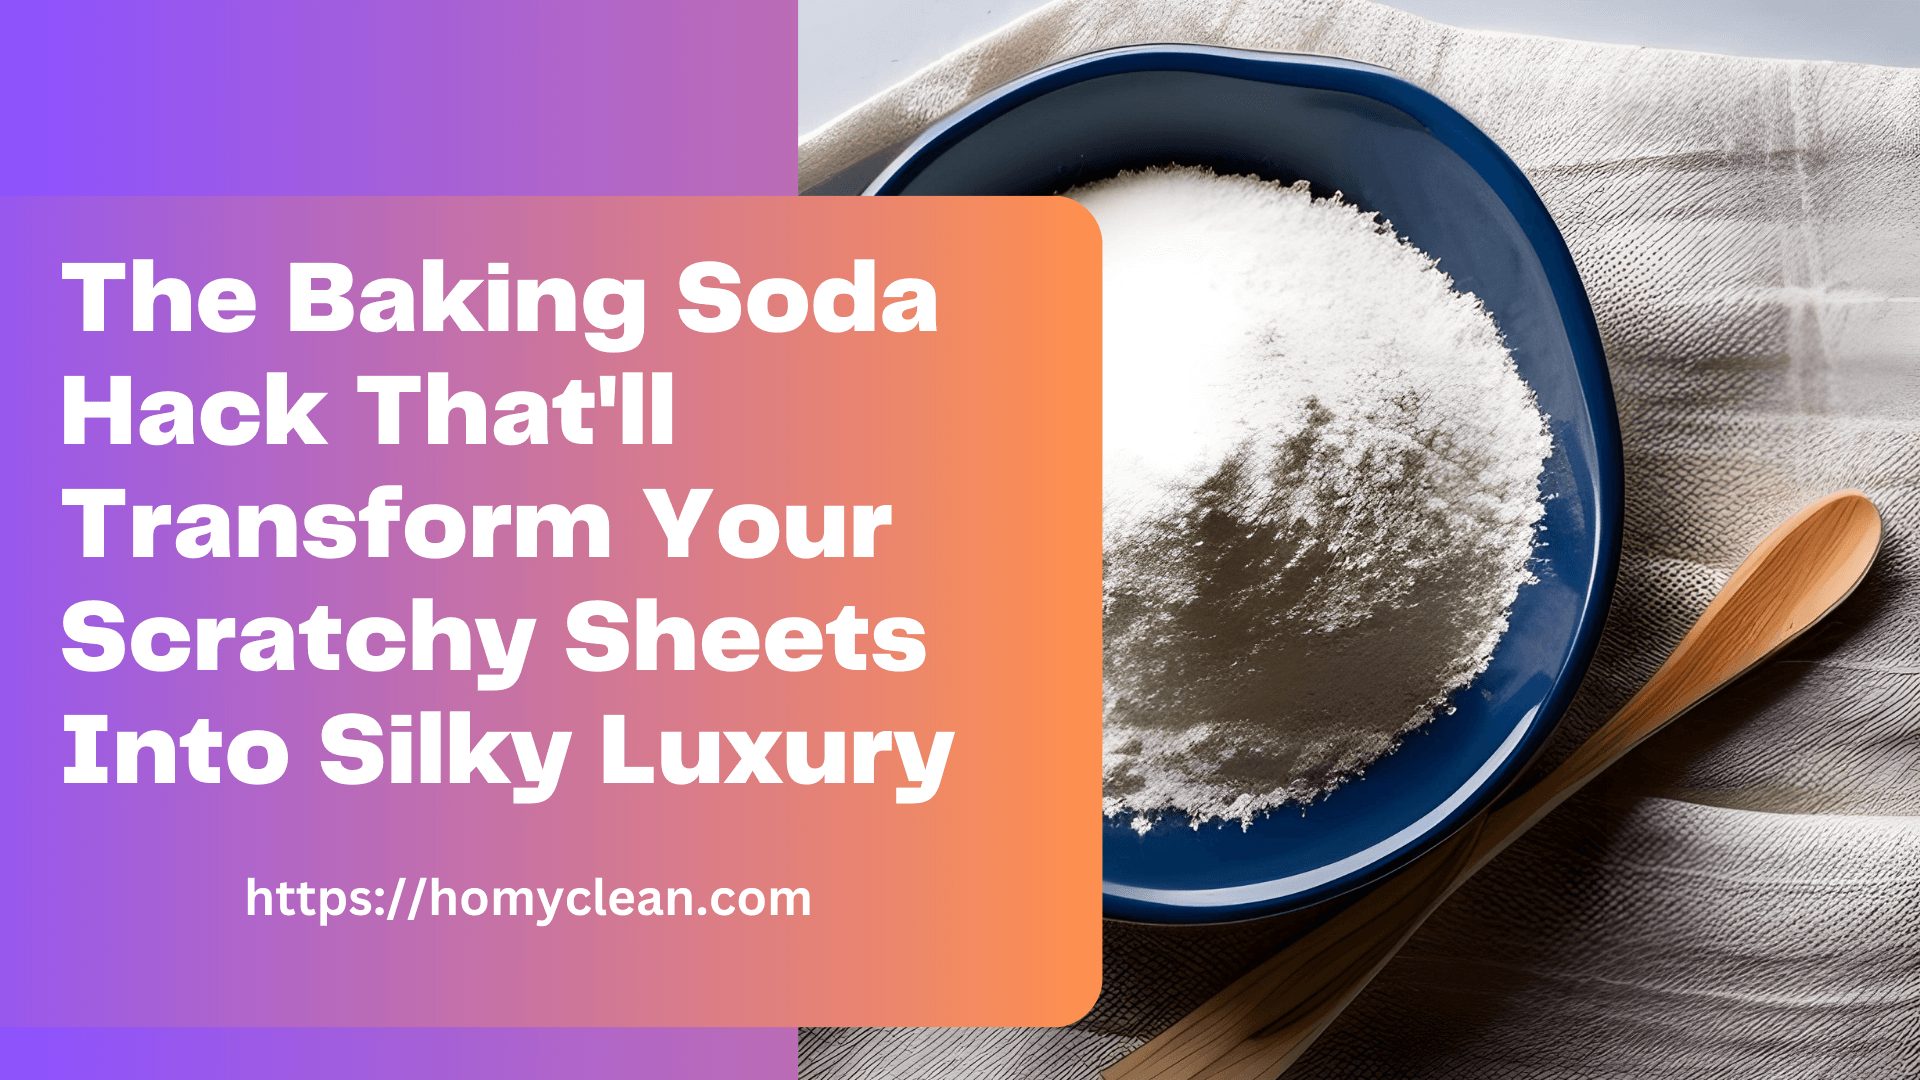 The Baking Soda Hacks That Will Transform Scratchy Sheets Into Silky Luxury